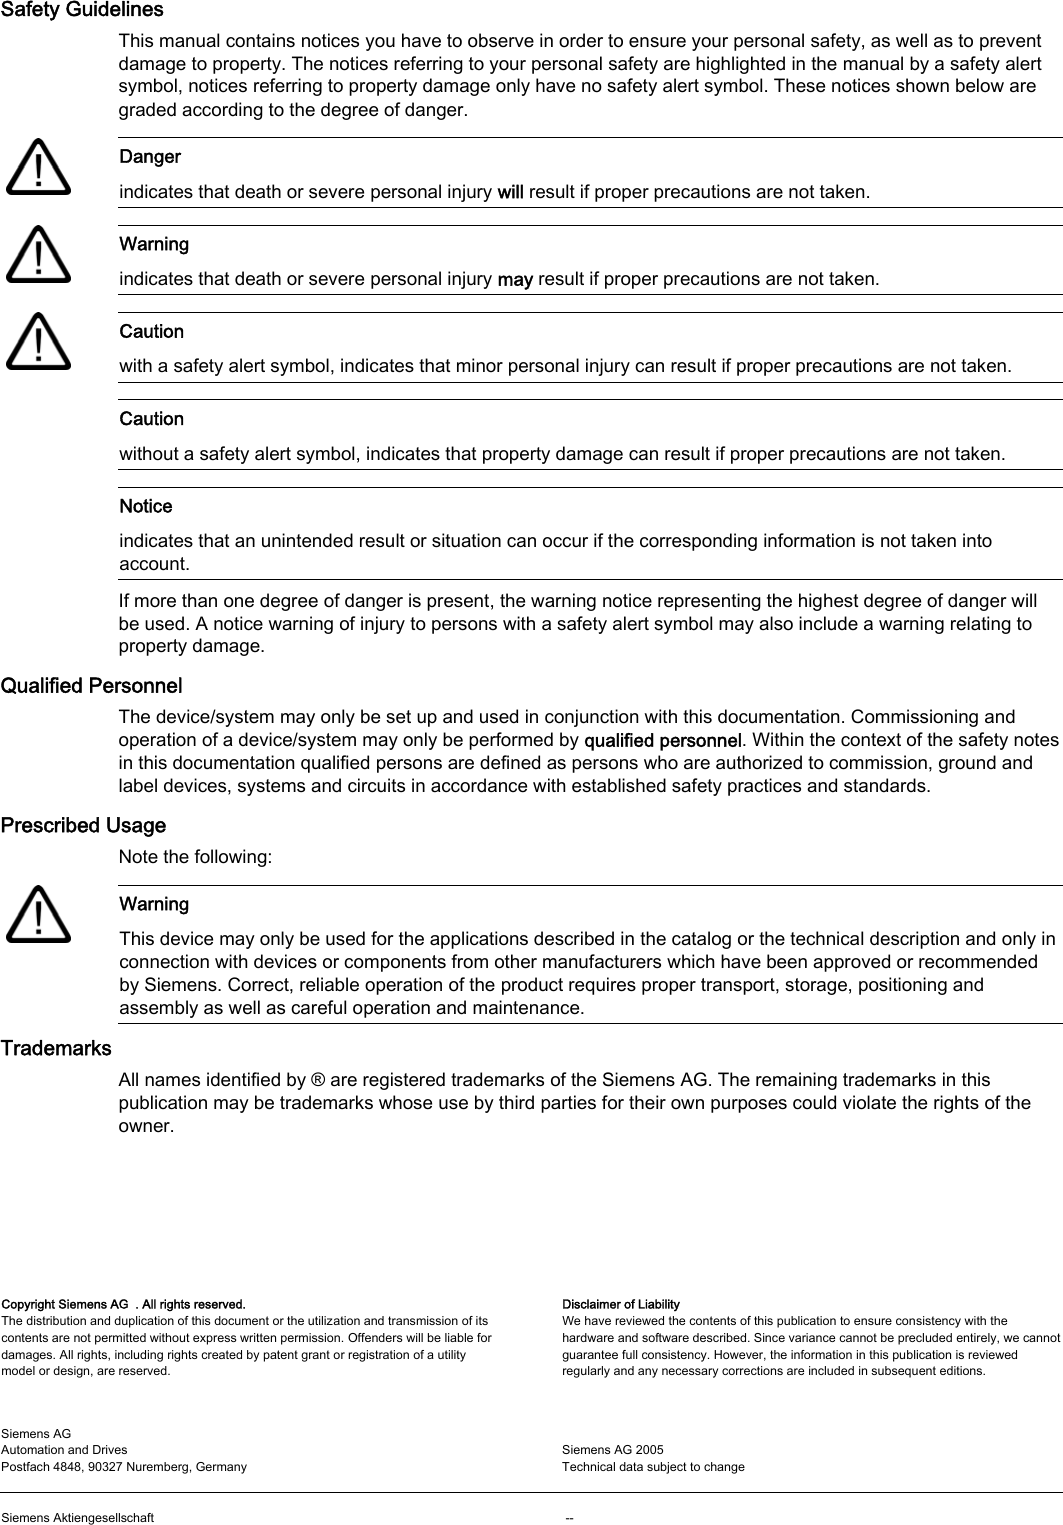       Safety Guidelines This manual contains notices you have to observe in order to ensure your personal safety, as well as to prevent damage to property. The notices referring to your personal safety are highlighted in the manual by a safety alert symbol, notices referring to property damage only have no safety alert symbol. These notices shown below are graded according to the degree of danger.    Danger indicates that death or severe personal injury will result if proper precautions are not taken.    Warning indicates that death or severe personal injury may result if proper precautions are not taken.    Caution with a safety alert symbol, indicates that minor personal injury can result if proper precautions are not taken.  Caution without a safety alert symbol, indicates that property damage can result if proper precautions are not taken.  Notice indicates that an unintended result or situation can occur if the corresponding information is not taken into account. If more than one degree of danger is present, the warning notice representing the highest degree of danger will be used. A notice warning of injury to persons with a safety alert symbol may also include a warning relating to property damage. Qualified Personnel The device/system may only be set up and used in conjunction with this documentation. Commissioning and operation of a device/system may only be performed by qualified personnel. Within the context of the safety notes in this documentation qualified persons are defined as persons who are authorized to commission, ground and label devices, systems and circuits in accordance with established safety practices and standards. Prescribed Usage Note the following:    Warning This device may only be used for the applications described in the catalog or the technical description and only in connection with devices or components from other manufacturers which have been approved or recommended by Siemens. Correct, reliable operation of the product requires proper transport, storage, positioning and assembly as well as careful operation and maintenance. Trademarks All names identified by ® are registered trademarks of the Siemens AG. The remaining trademarks in this publication may be trademarks whose use by third parties for their own purposes could violate the rights of the owner. Copyright Siemens AG  . All rights reserved. The distribution and duplication of this document or the utilization and transmission of its contents are not permitted without express written permission. Offenders will be liable for damages. All rights, including rights created by patent grant or registration of a utility model or design, are reserved.  Disclaimer of Liability We have reviewed the contents of this publication to ensure consistency with the hardware and software described. Since variance cannot be precluded entirely, we cannot guarantee full consistency. However, the information in this publication is reviewed regularly and any necessary corrections are included in subsequent editions. Siemens AG  Automation and Drives Postfach 4848, 90327 Nuremberg, Germany   Siemens AG 2005  Technical data subject to change   Siemens Aktiengesellschaft     --  